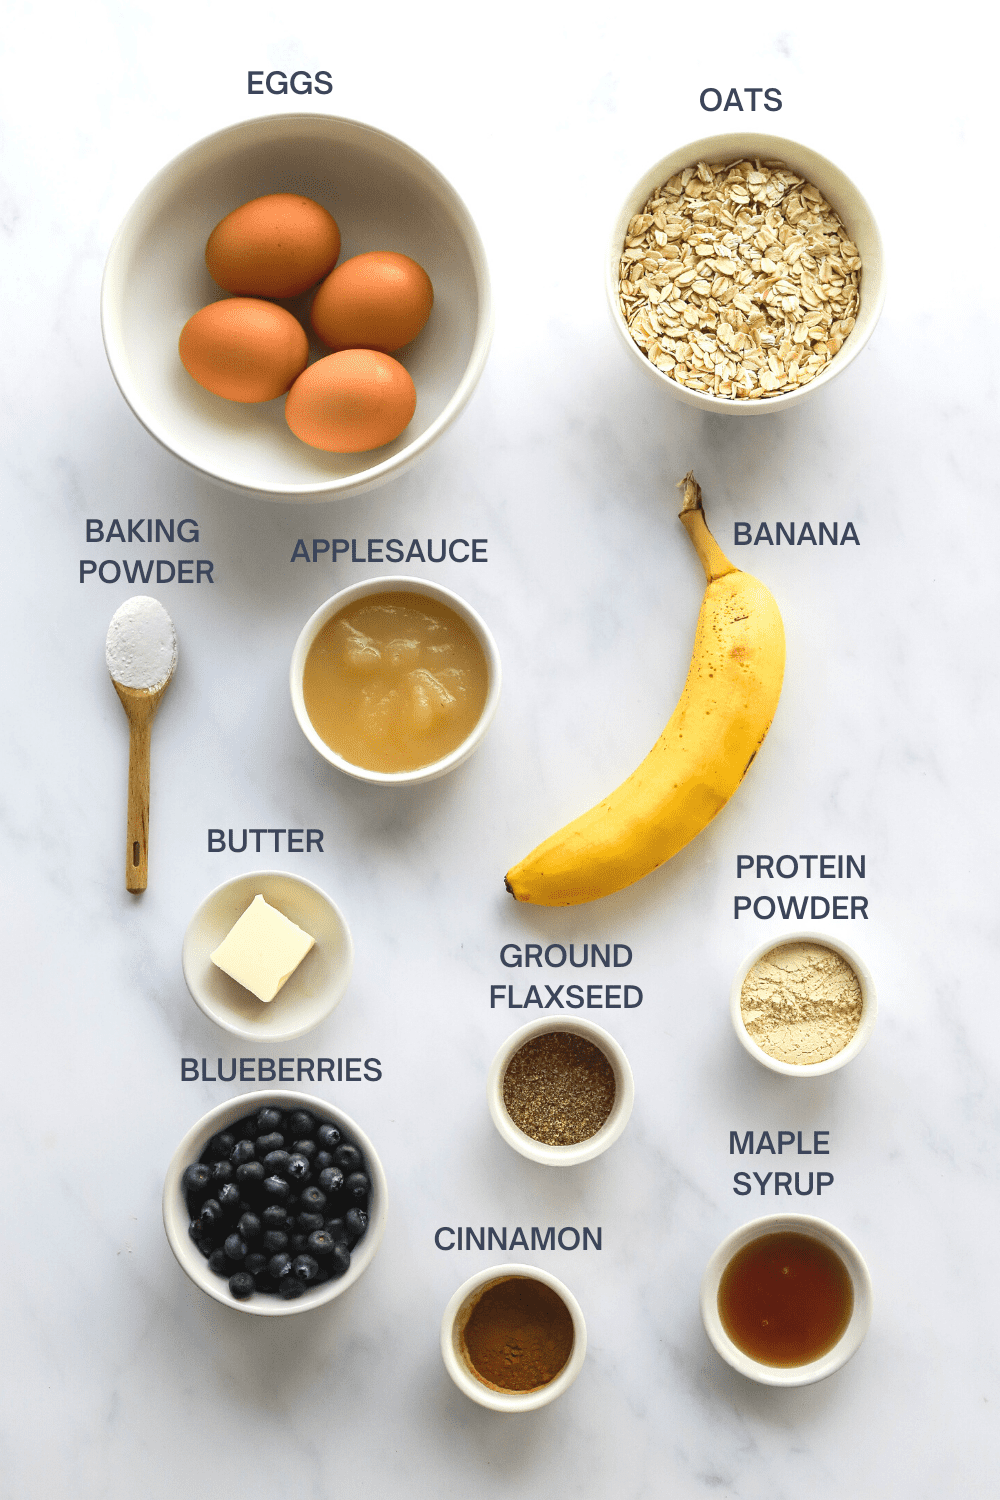 Bowl filled with whole eggs next to a bowl of oats with a spoon with baking powder on it, bowl of applesauce, banana, butter, flaxseeds, protein powder, blueberries, maple syrup and cinnamon in front of it with labels over each ingredient. 